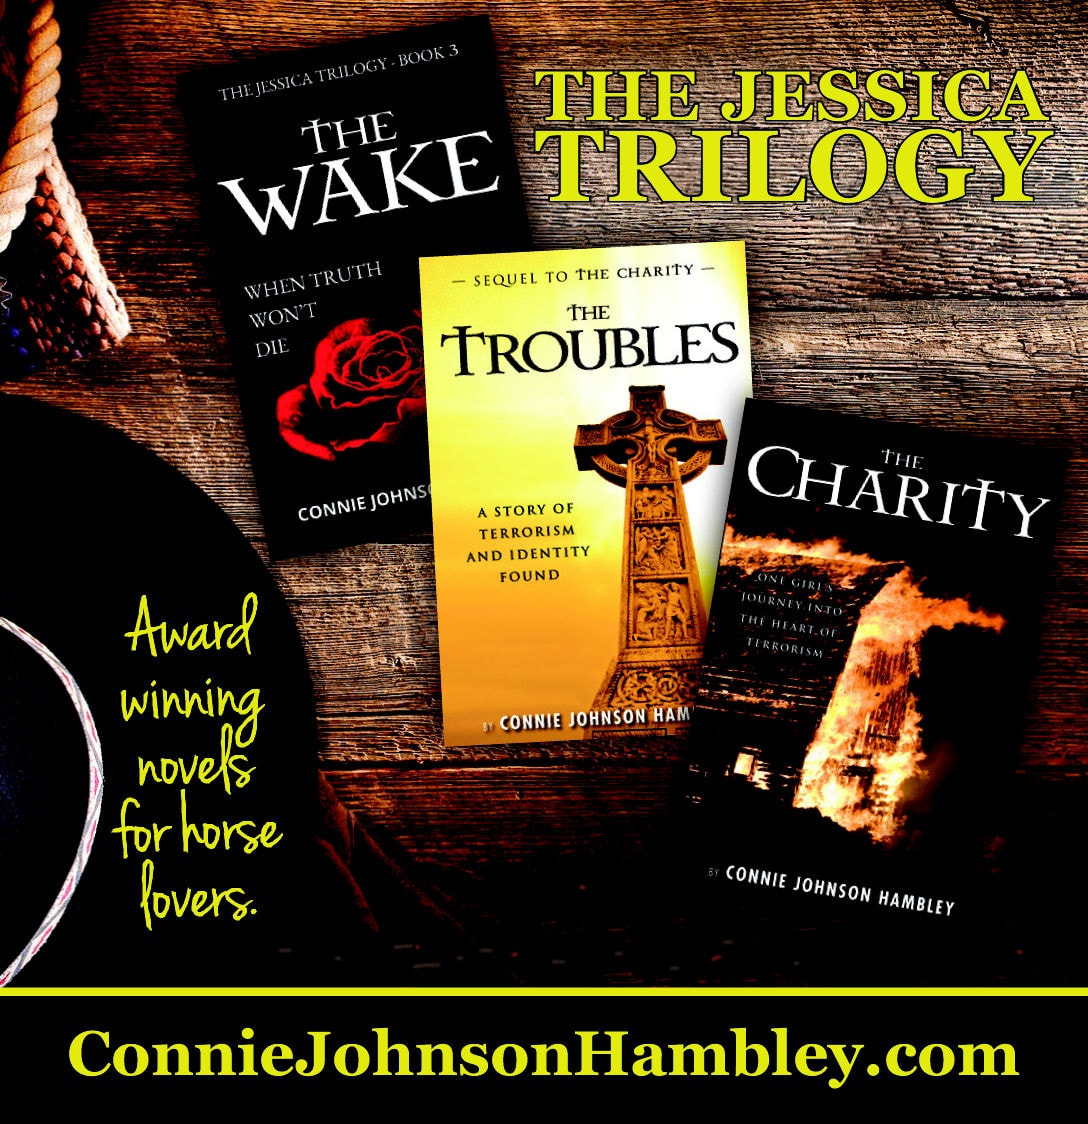 The Wake, The Troubles, and The Charity Books by Connie Johnson Hambley